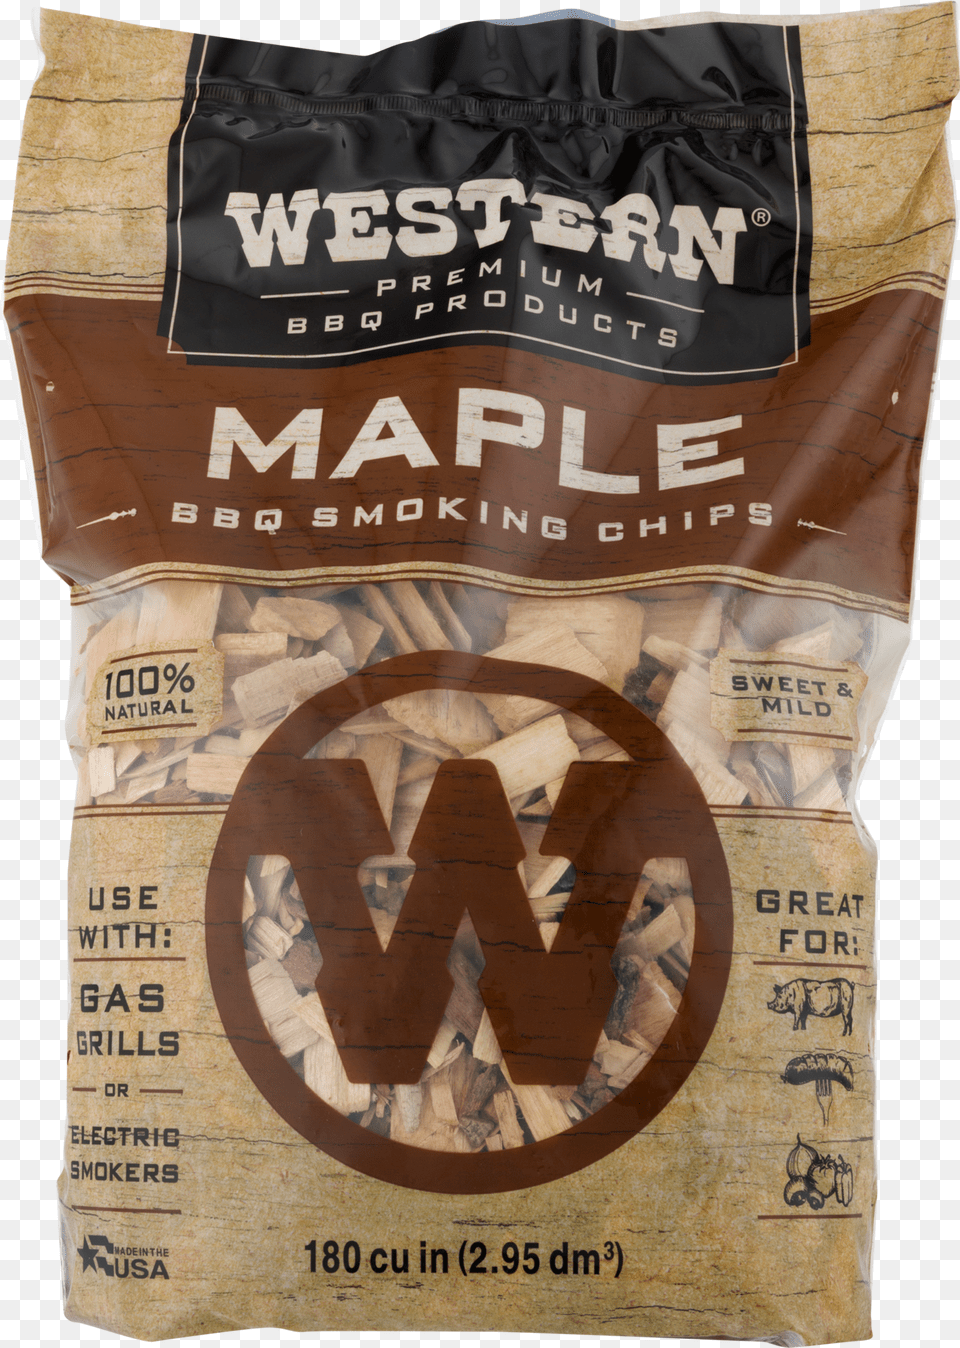 Western Premium Bbq Products Maple Smoking Chips 180 Cu In Walmartcom Hickory Bbq Smoking Chips, Bag, Food, Adult, Male Free Transparent Png